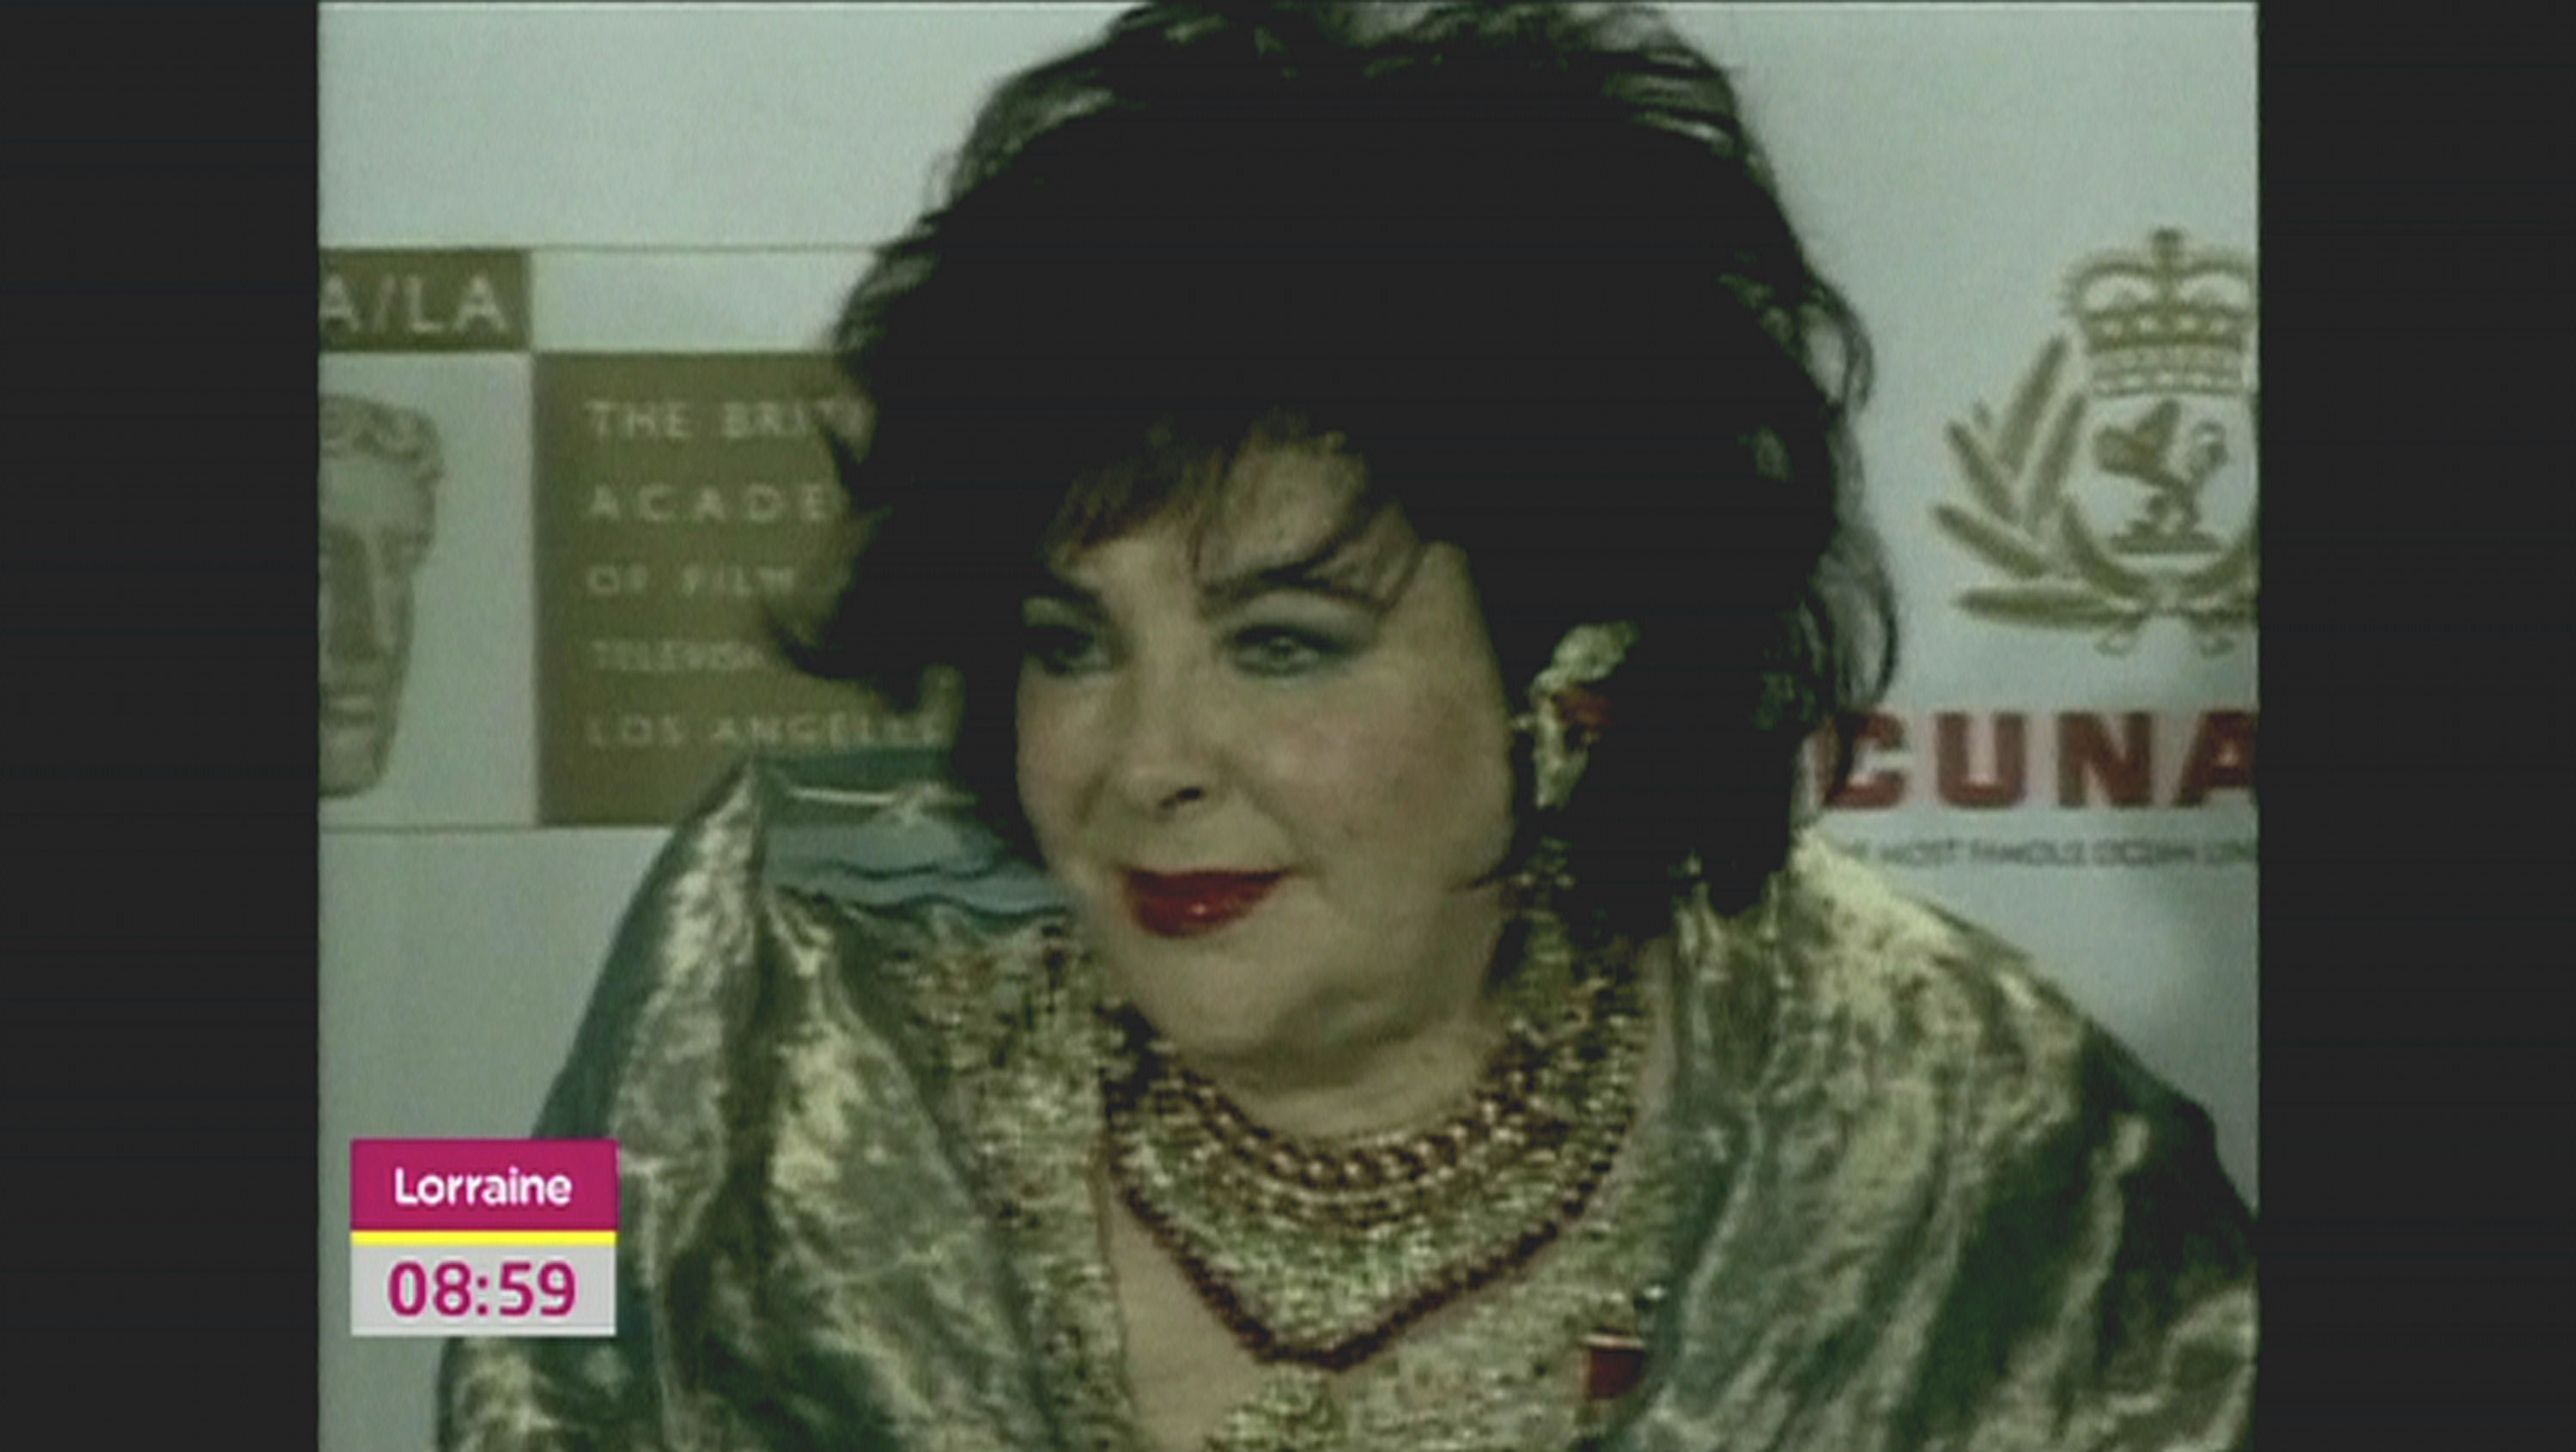 Elizabeth Taylor has passed away at the age of 79 May she rest in peace